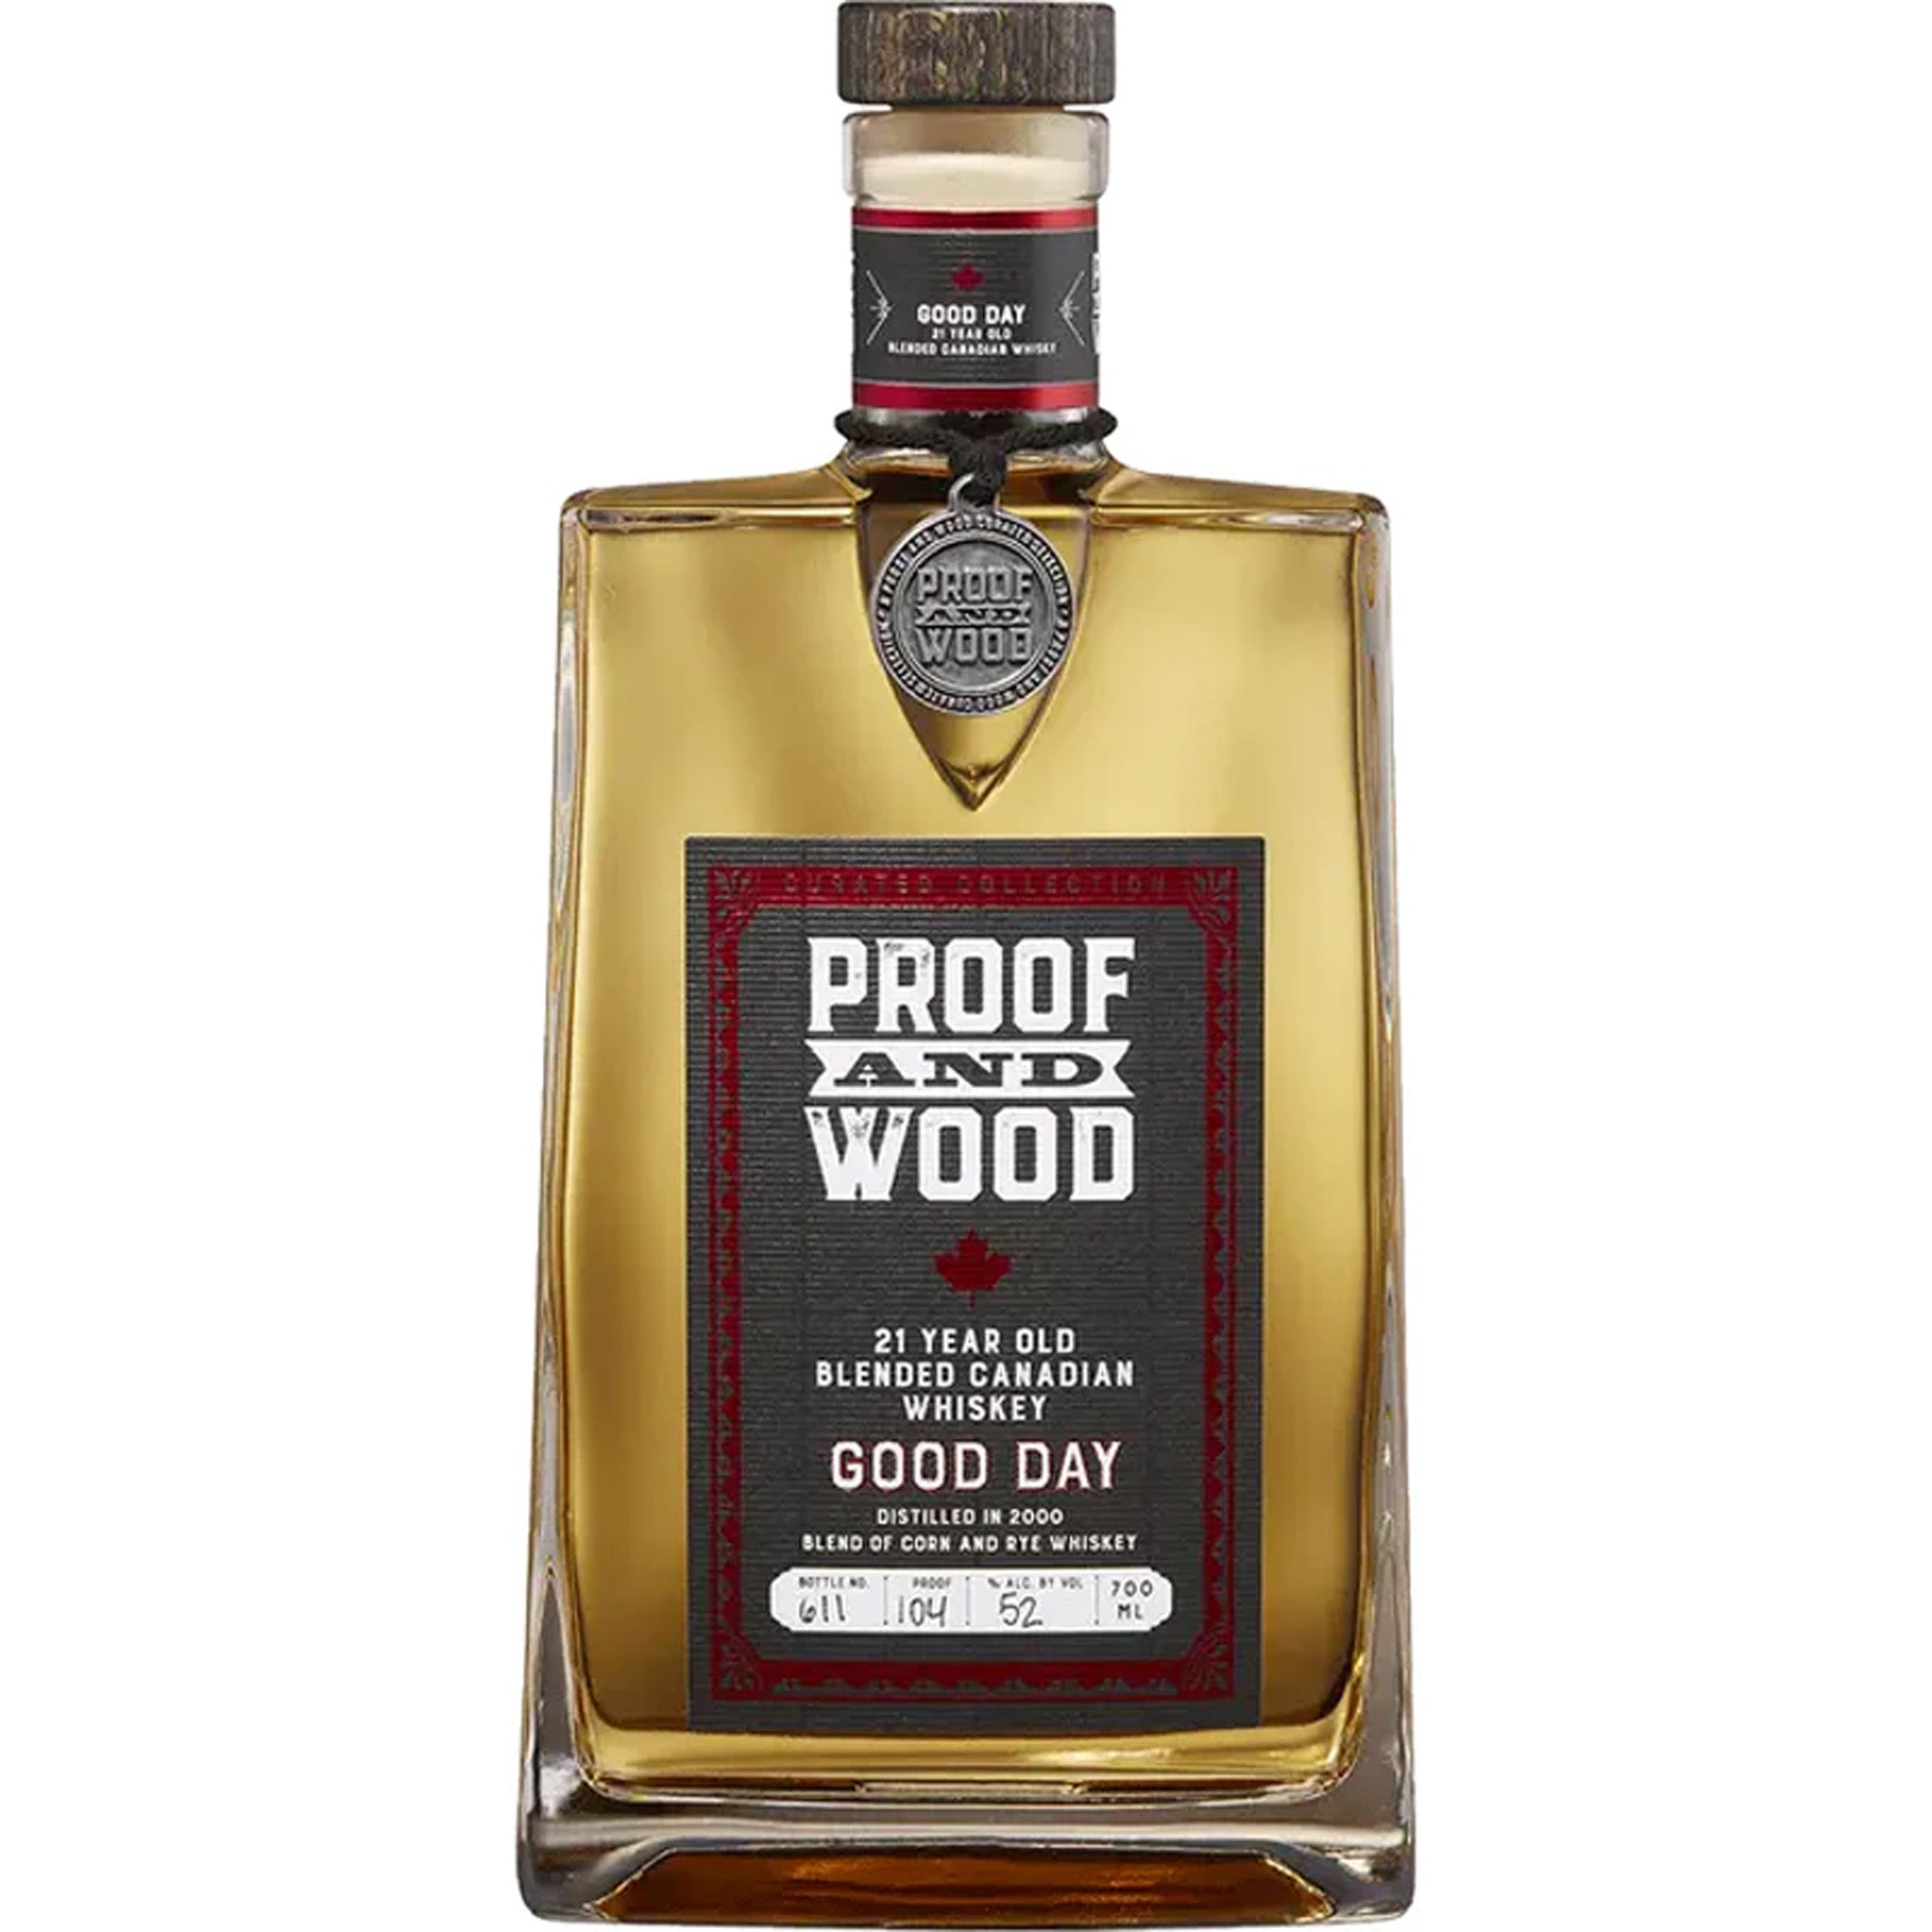 Proof & Wood Good Day 21 Year Old Canadian Whiskey